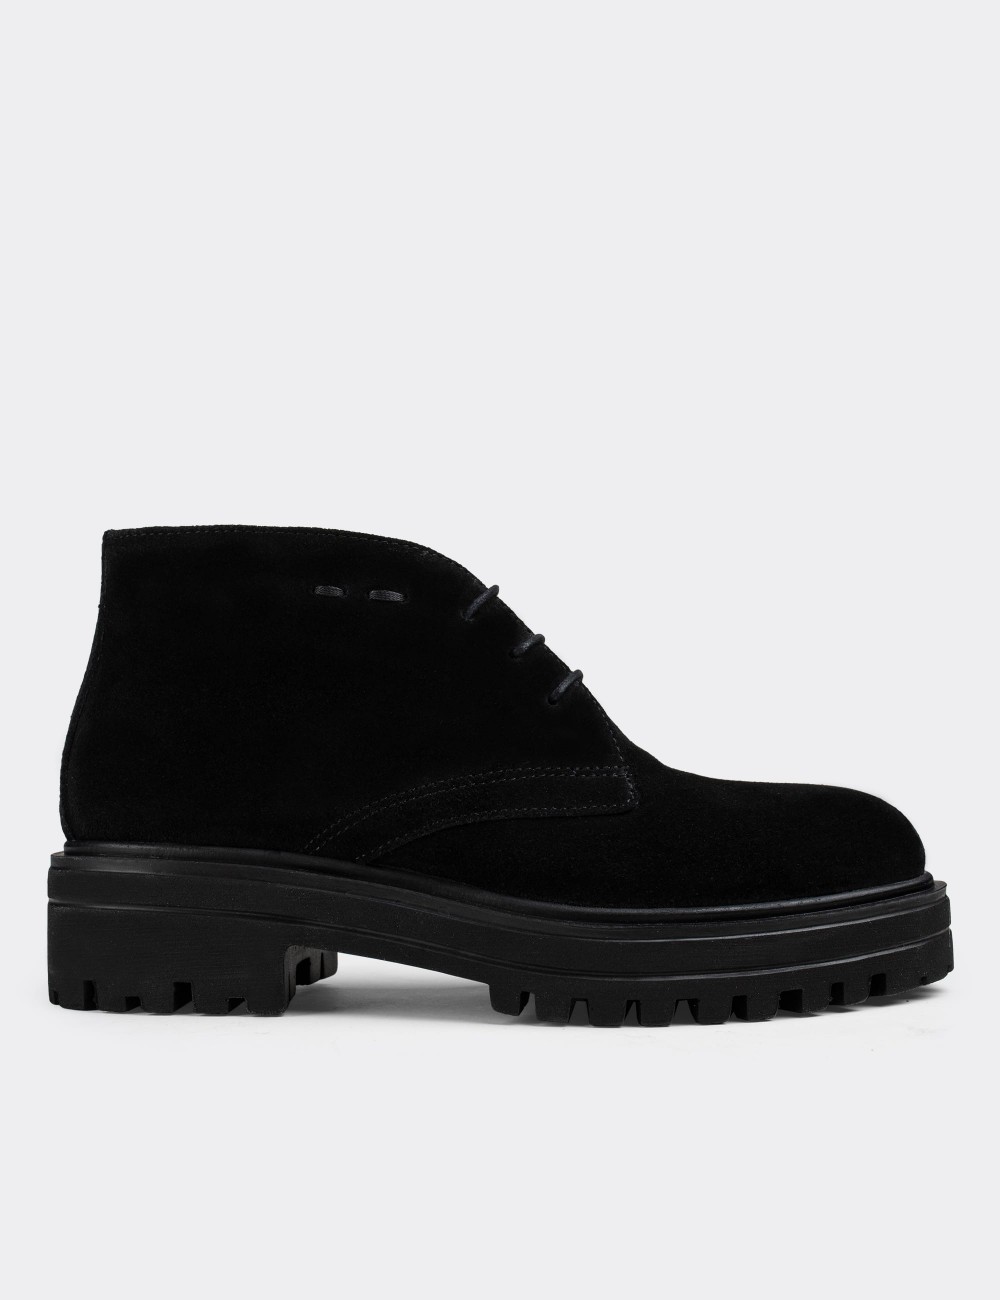 Black Suede Leather Desert Boots - 01847ZSYHE02